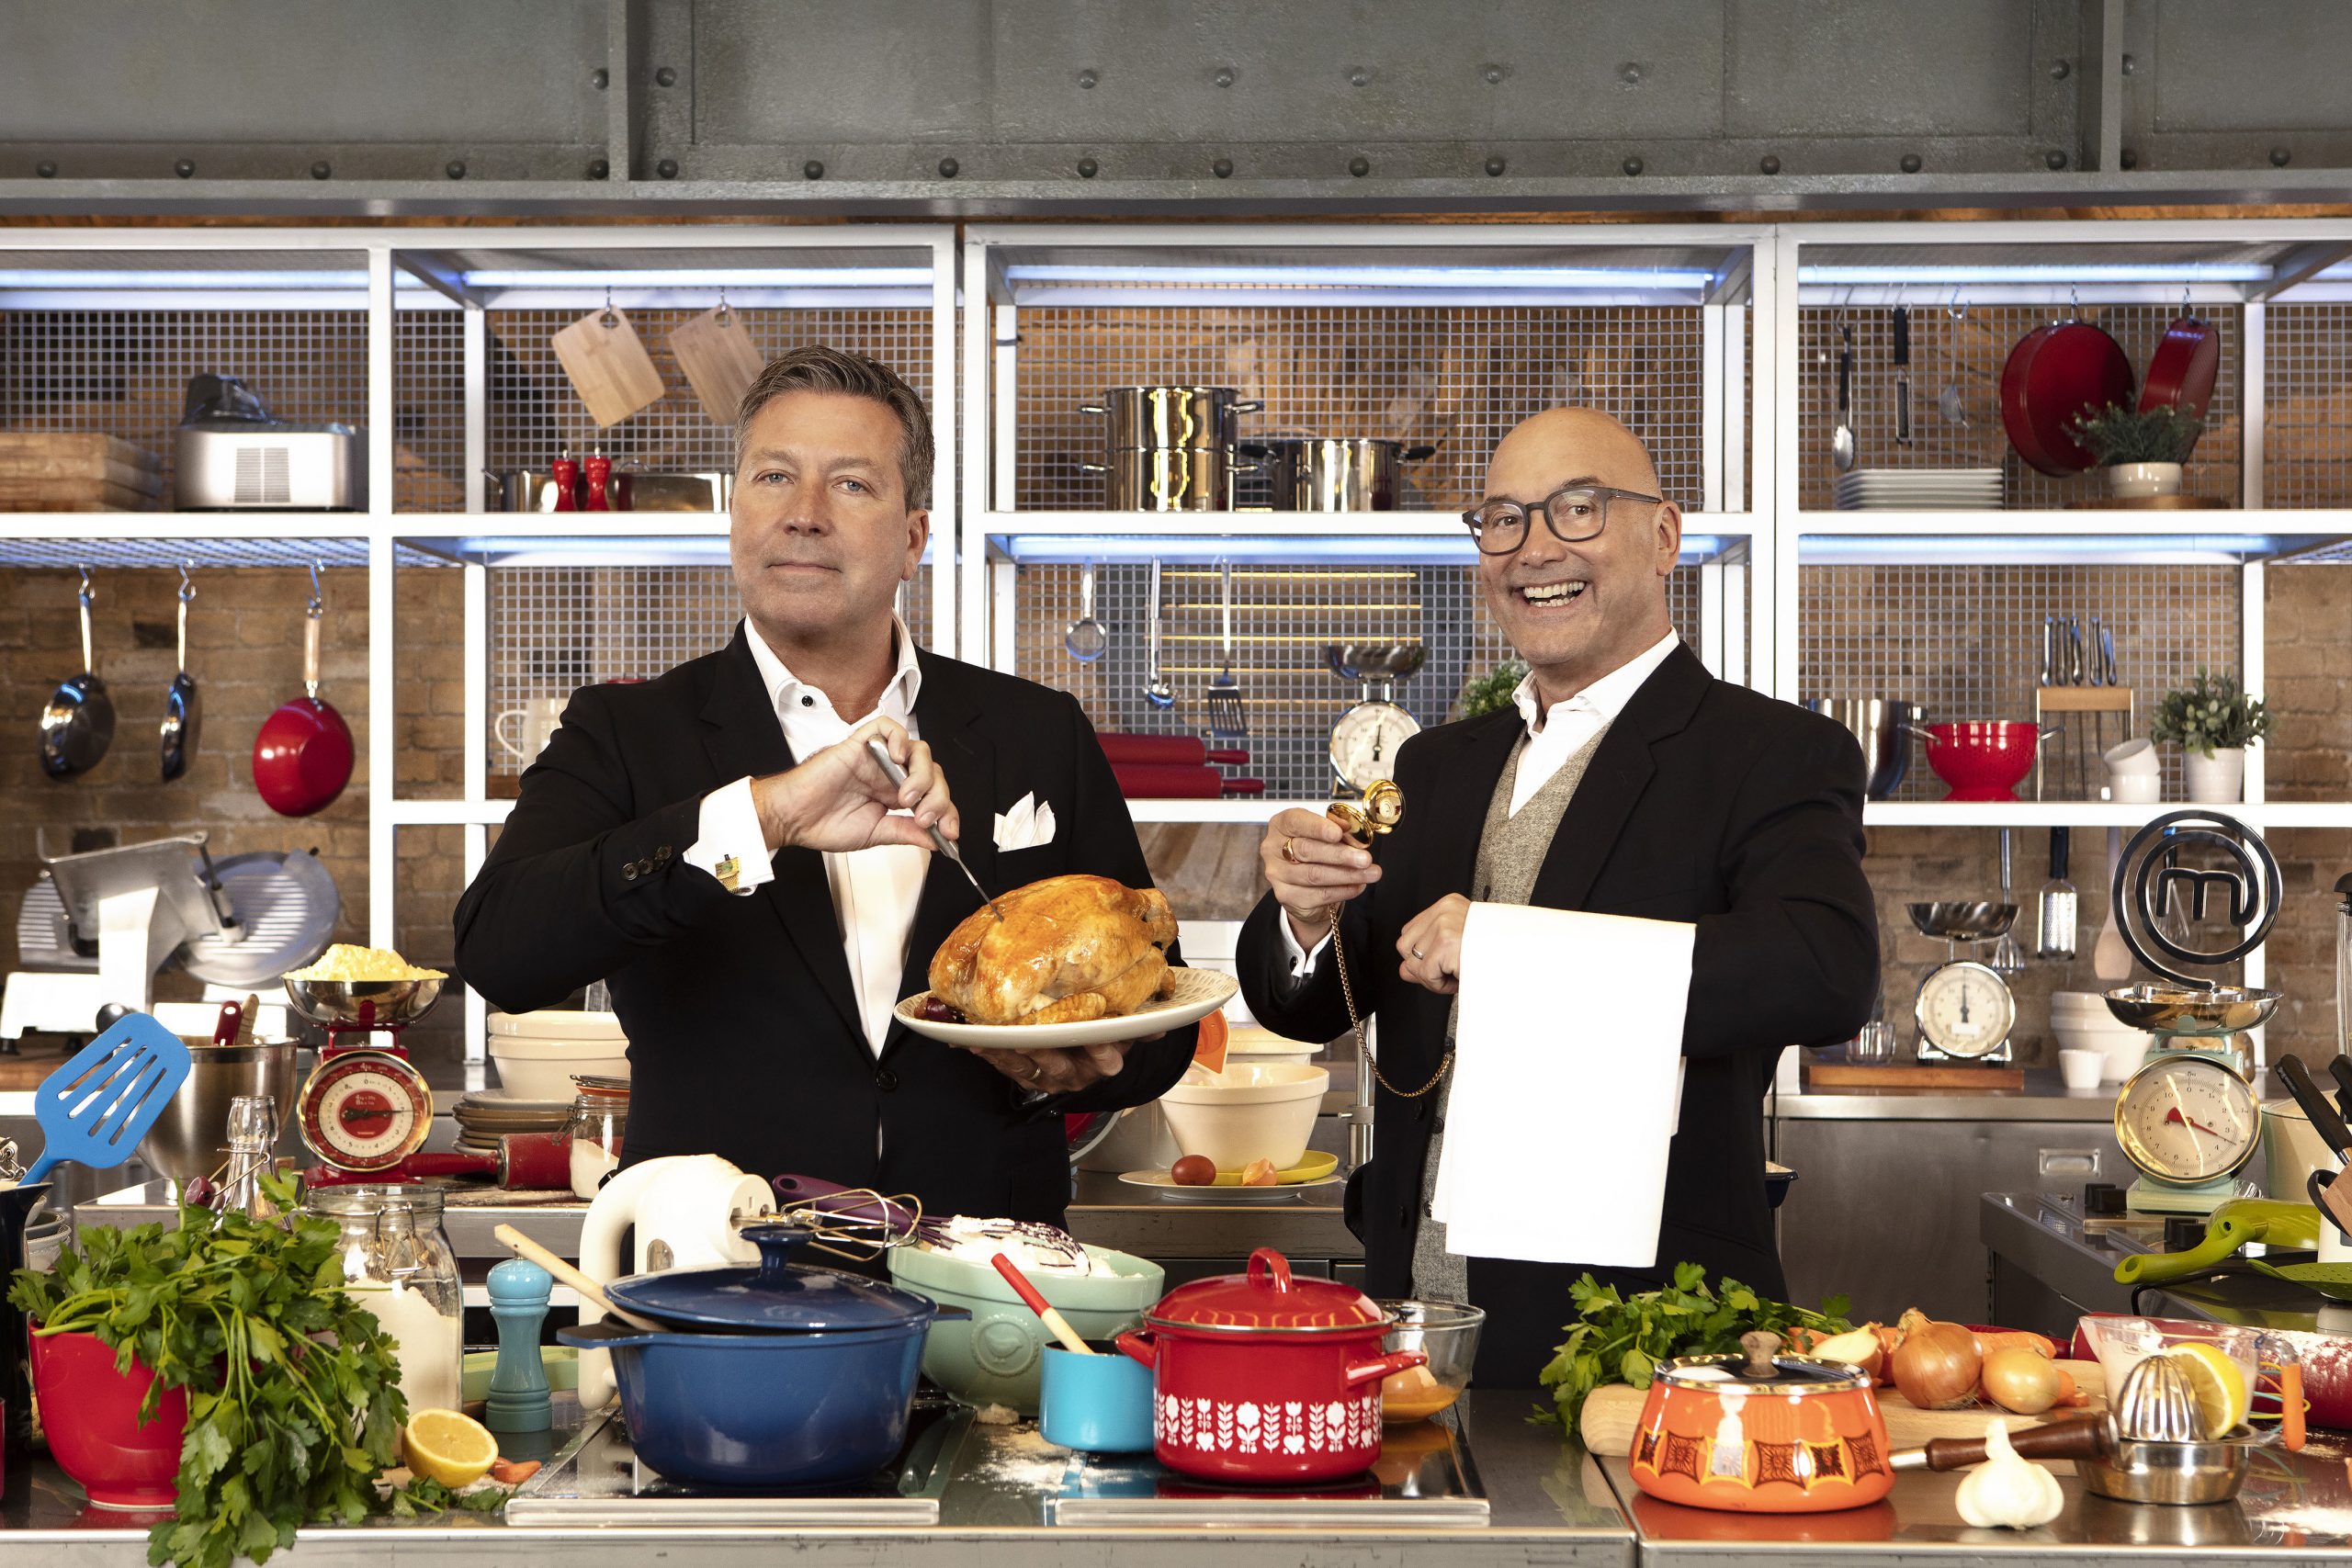 MasterChef judges John Torode and Gregg Wallace reveal their pet hates